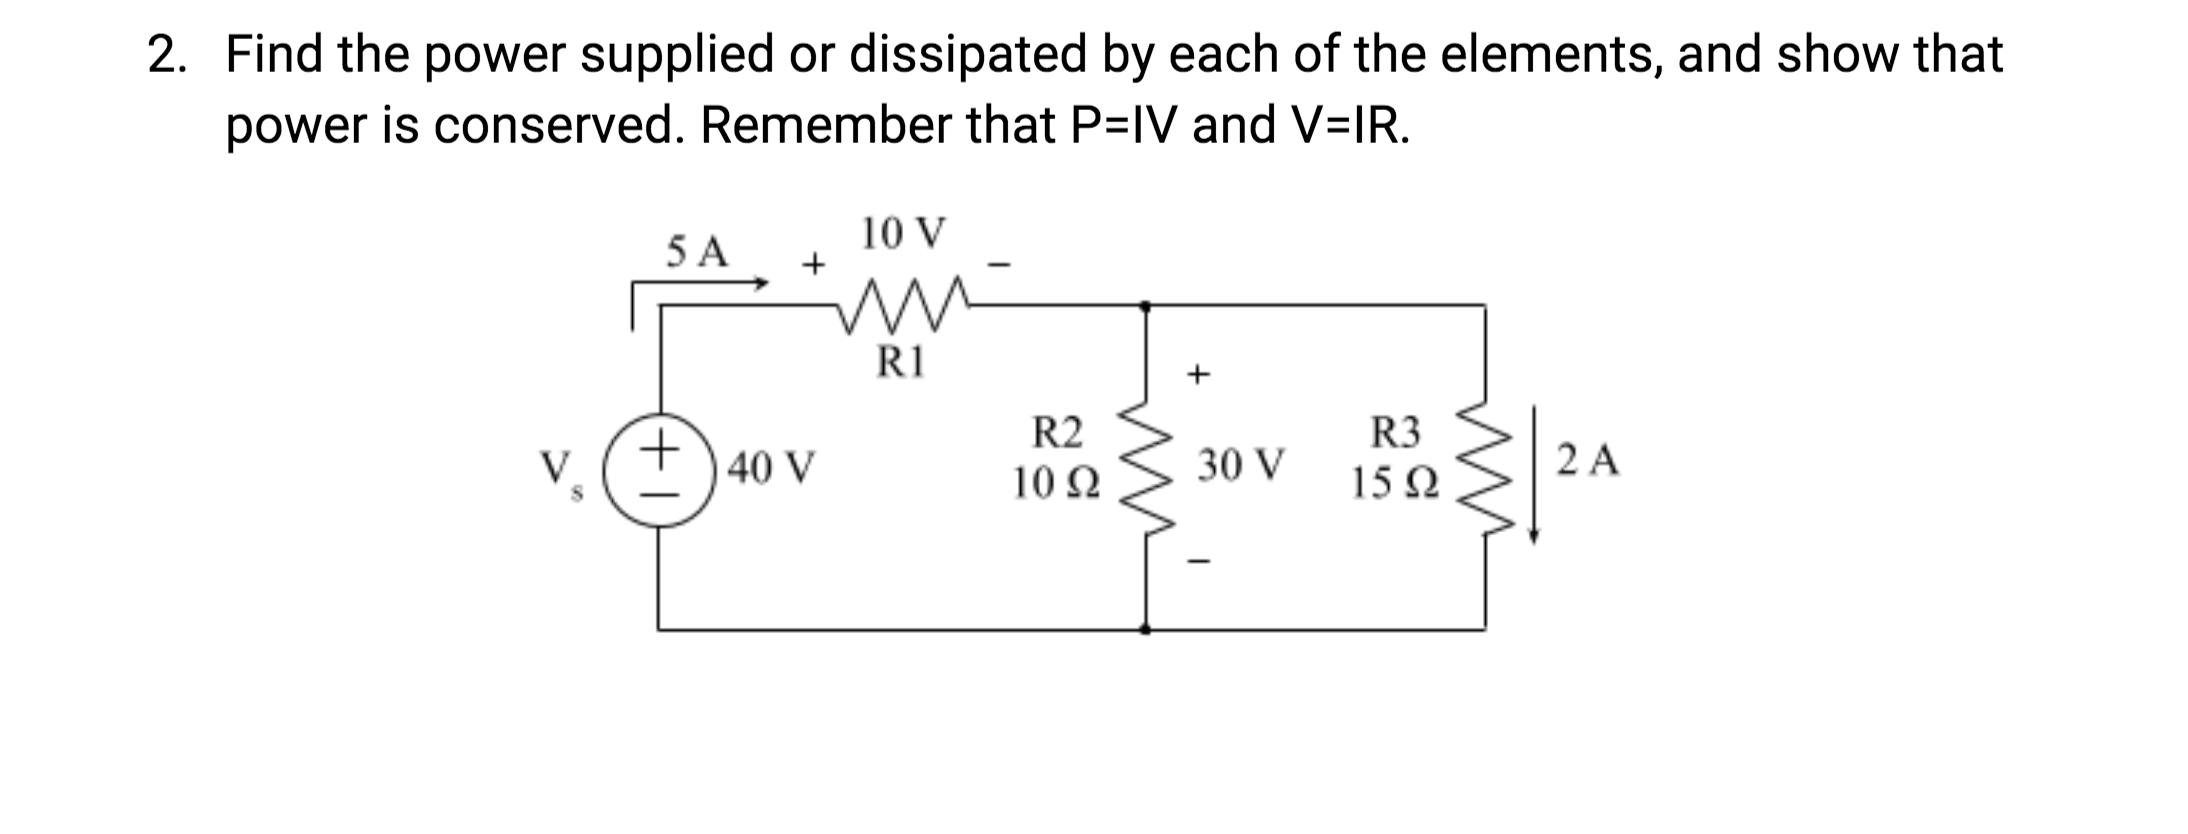 2. Find the power supplied or dissipated by each of the elements, and show that power is conserved. Remember that P=IV and V=